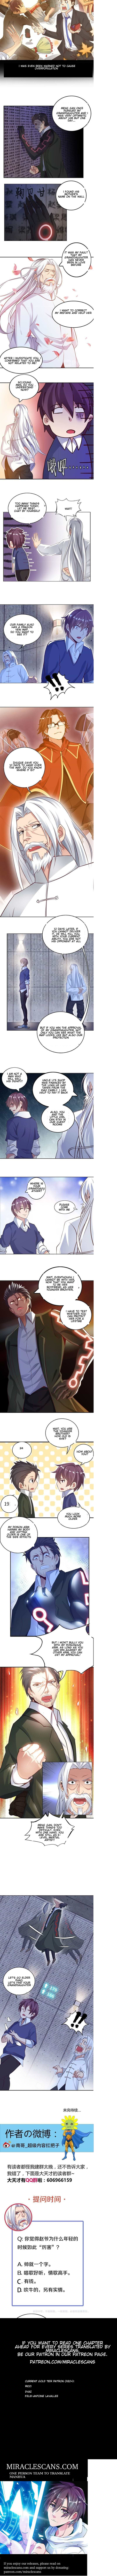 I Am An Invincible Genius Ch. 9 Chapter 9